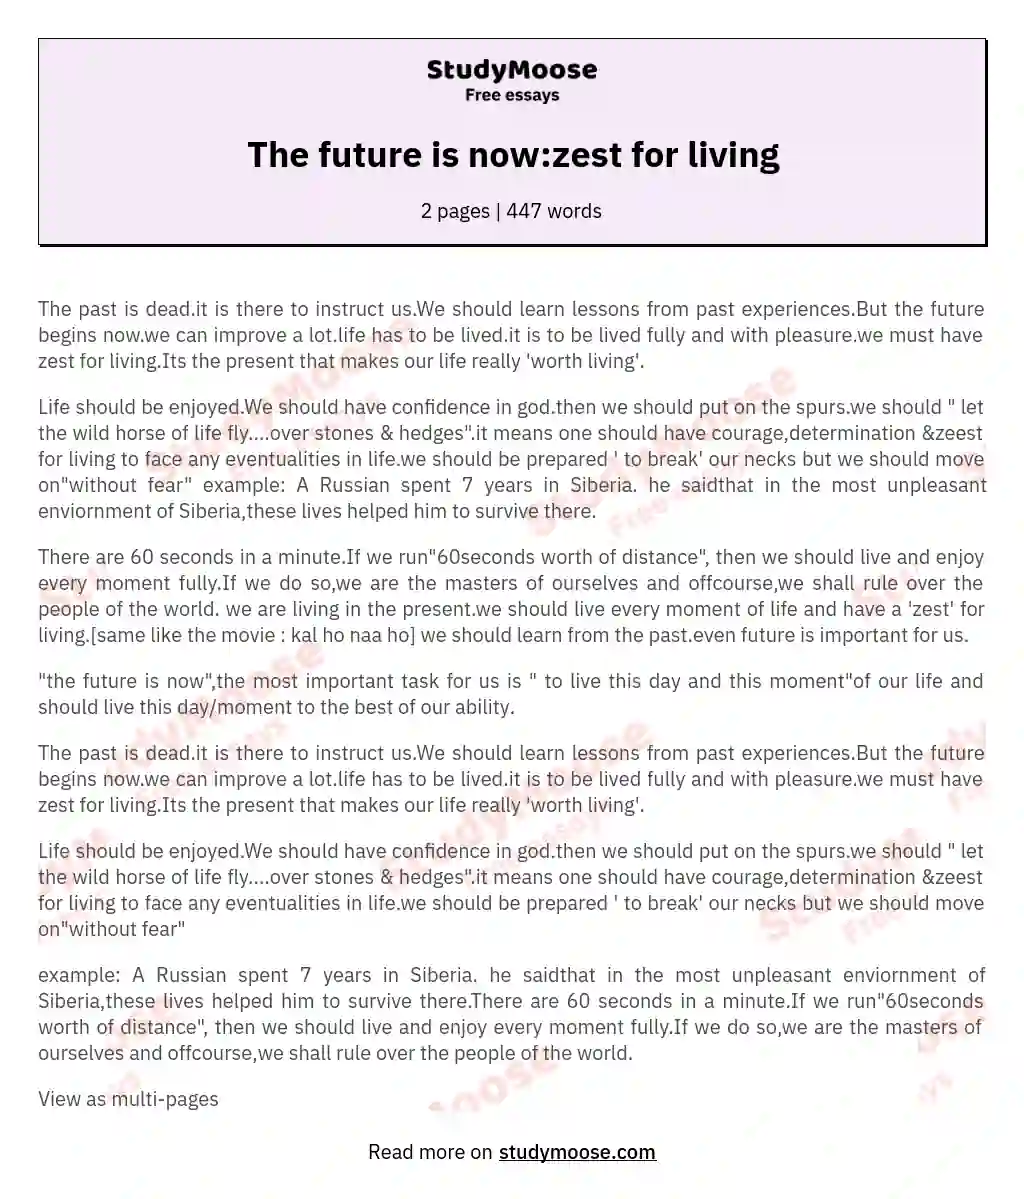 The future is now:zest for living essay